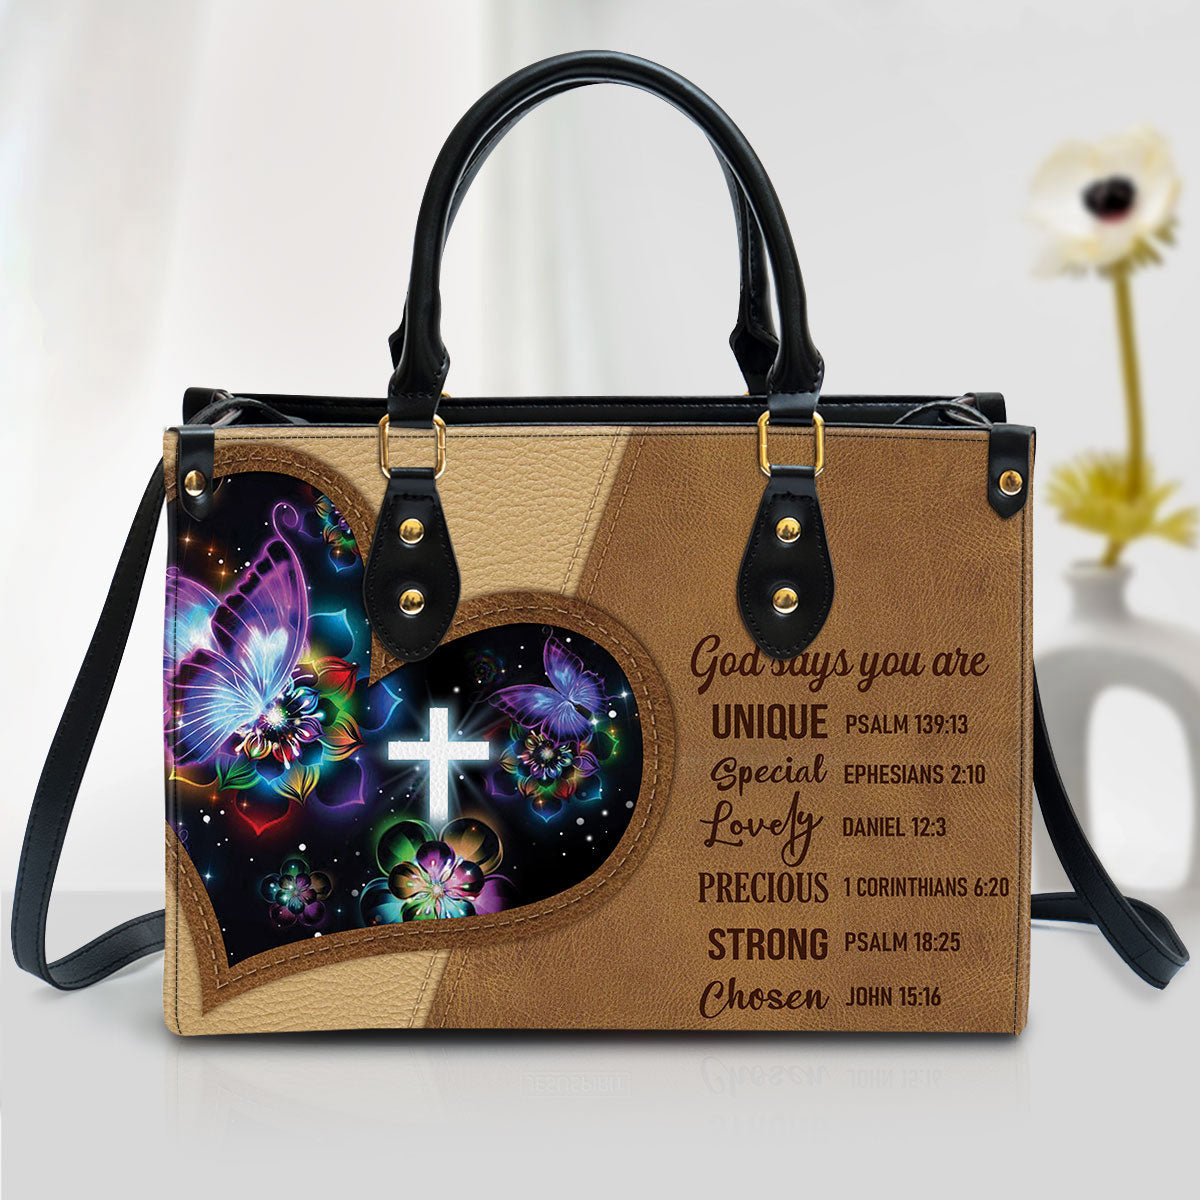 God Says You Are Unique - Beautiful Butterfly Leather Bag - Christian Pu Leather Bags For Women